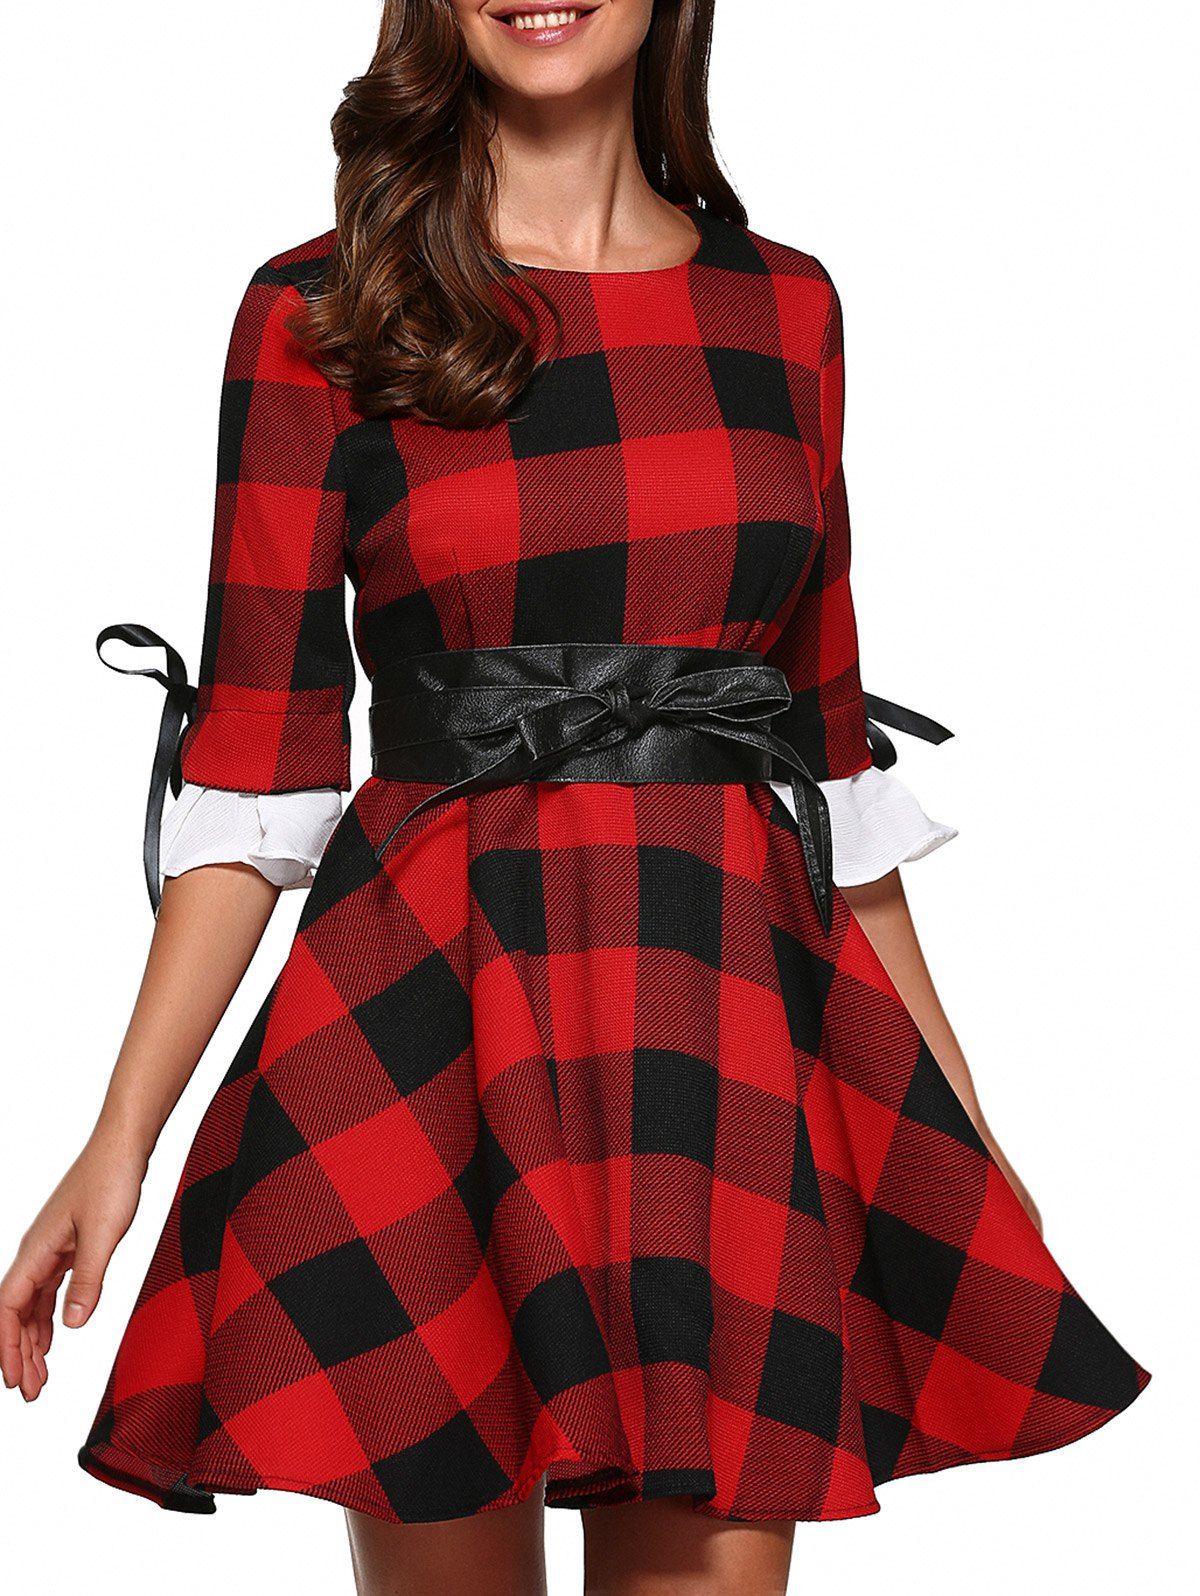 [41% OFF] 2021 Retro Bowknot Plaid Flare Dress In RED | DressLily